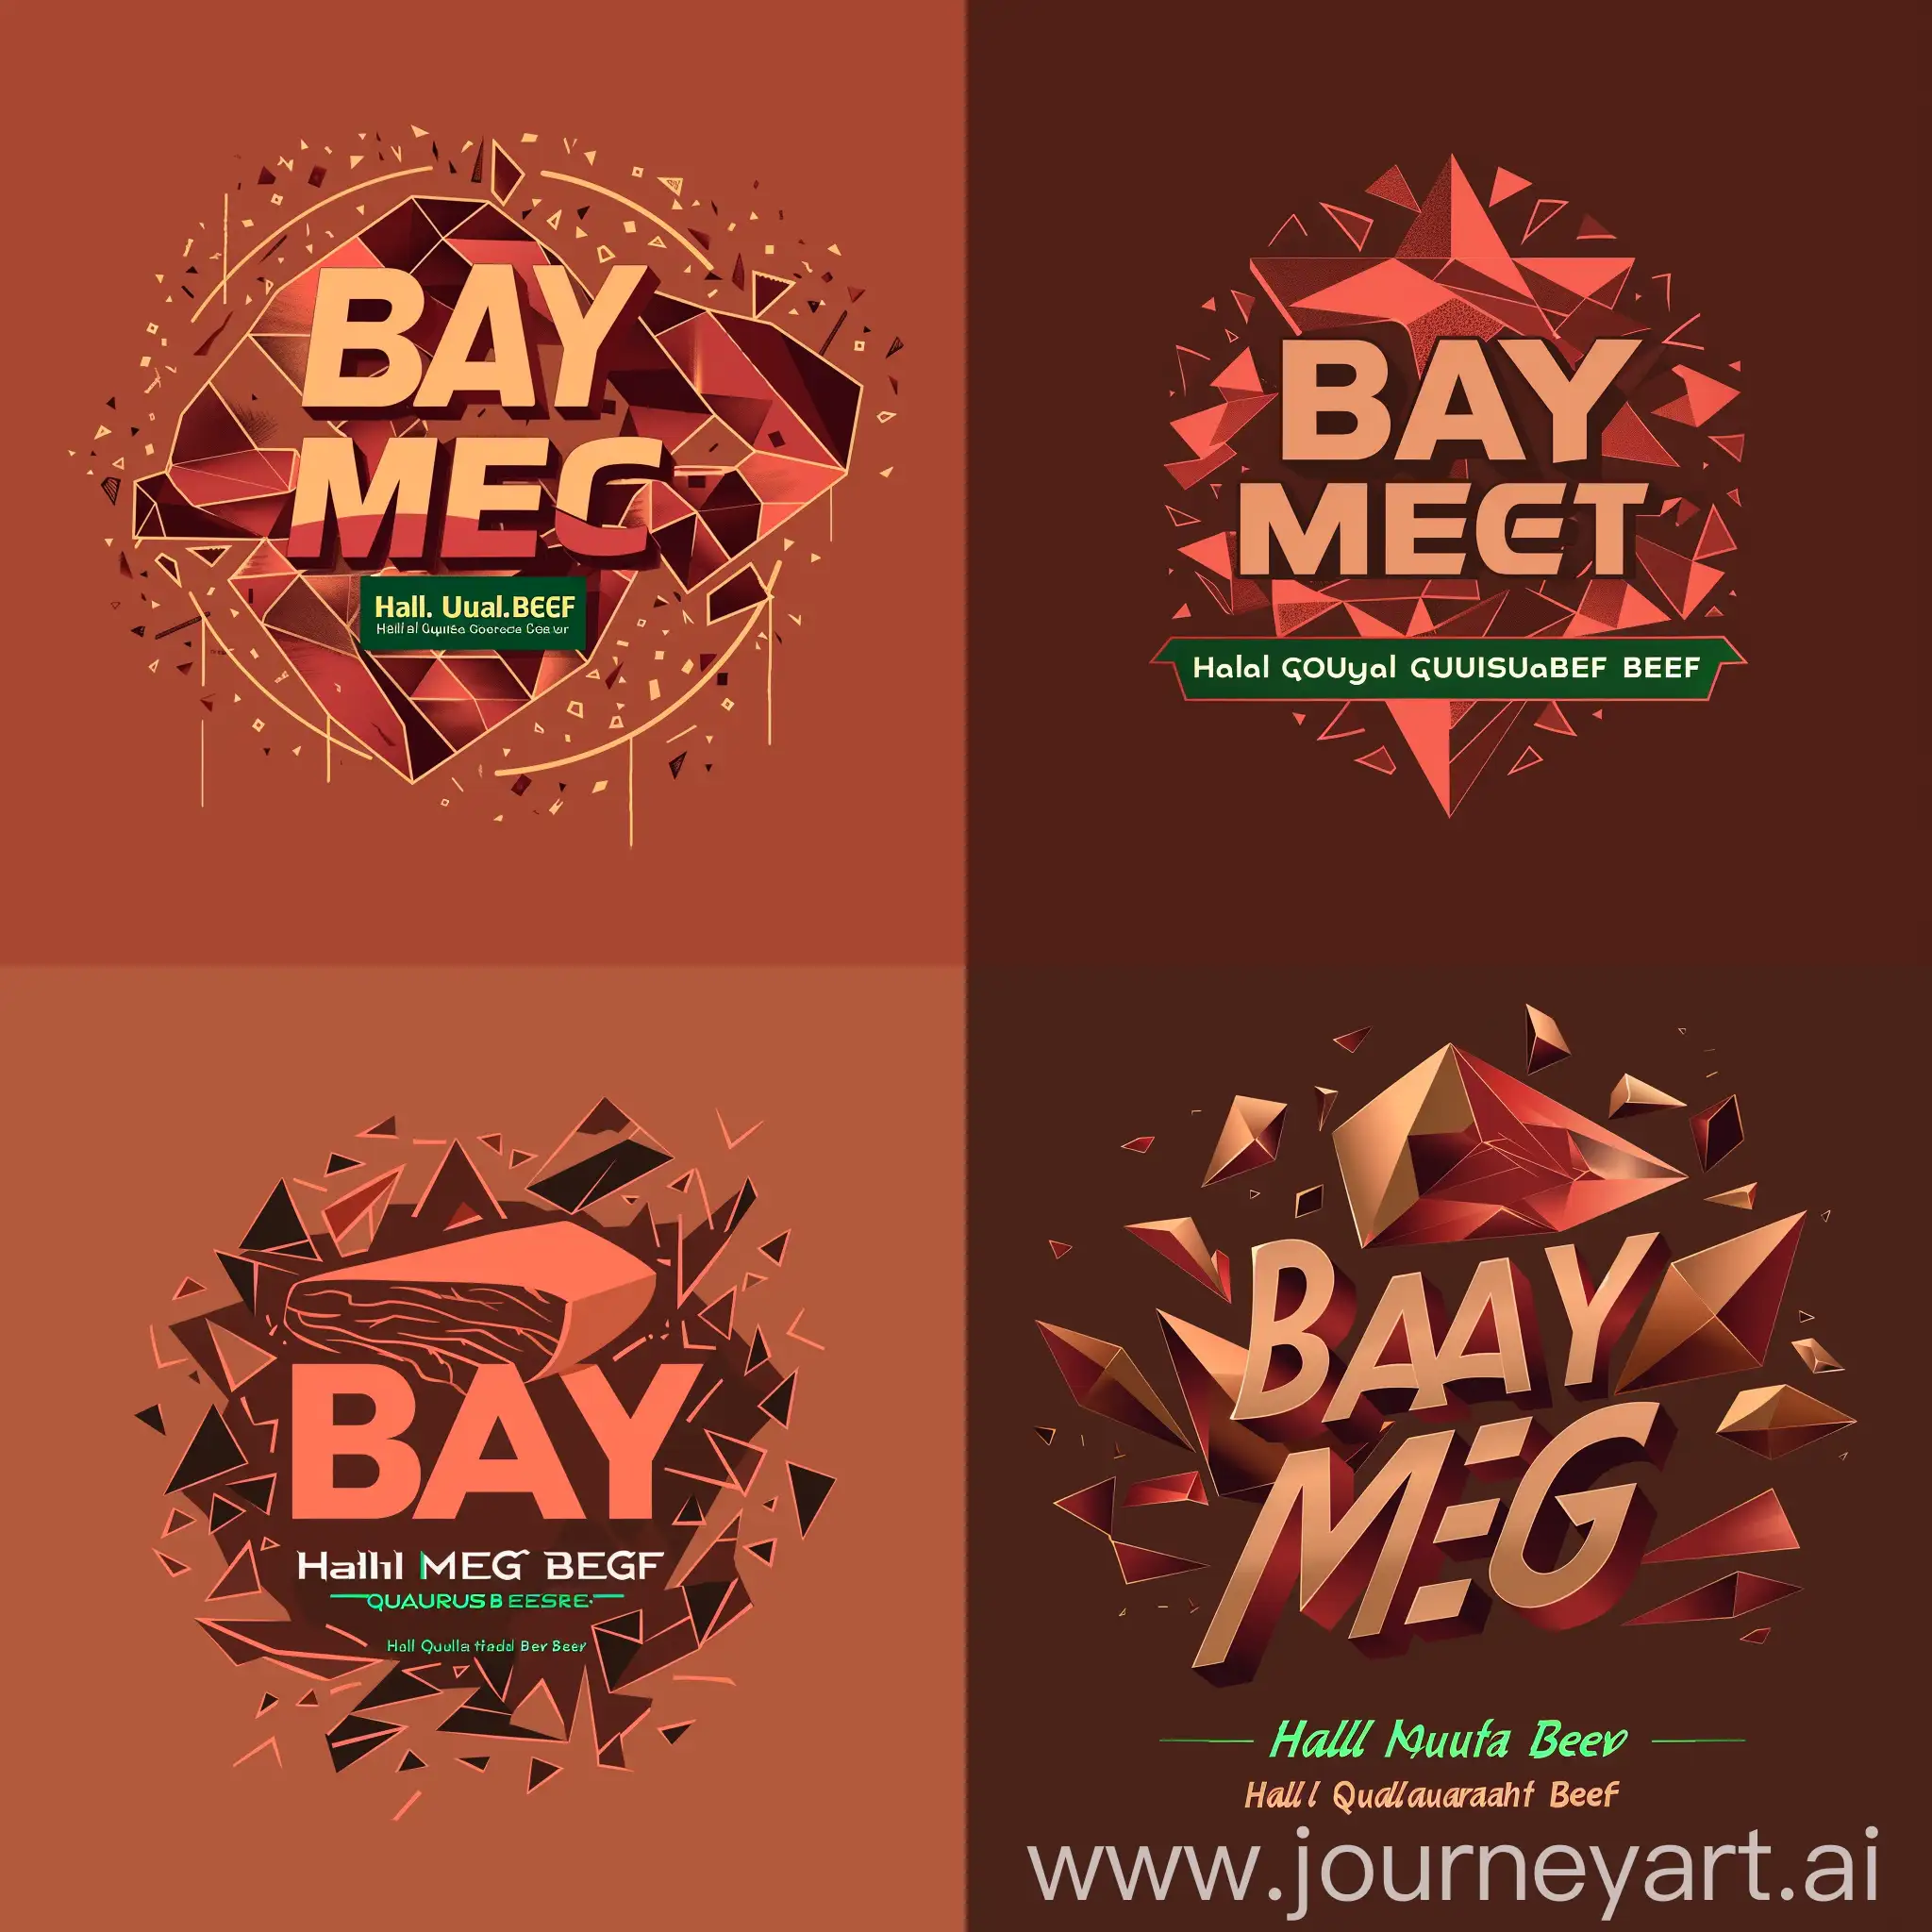 The BAY MEAT logo is made in warm shades of red and brown. The company's name is written in a large, clear font, symbolizing quality and reliability. Abstract geometric elements are arranged around the text, resembling the shape of a piece of meat, but without images of living creatures. Under the name, in a smaller font, the slogan "Halal Quality Beef" is written in green, emphasizing naturalness and compliance with halal standards.